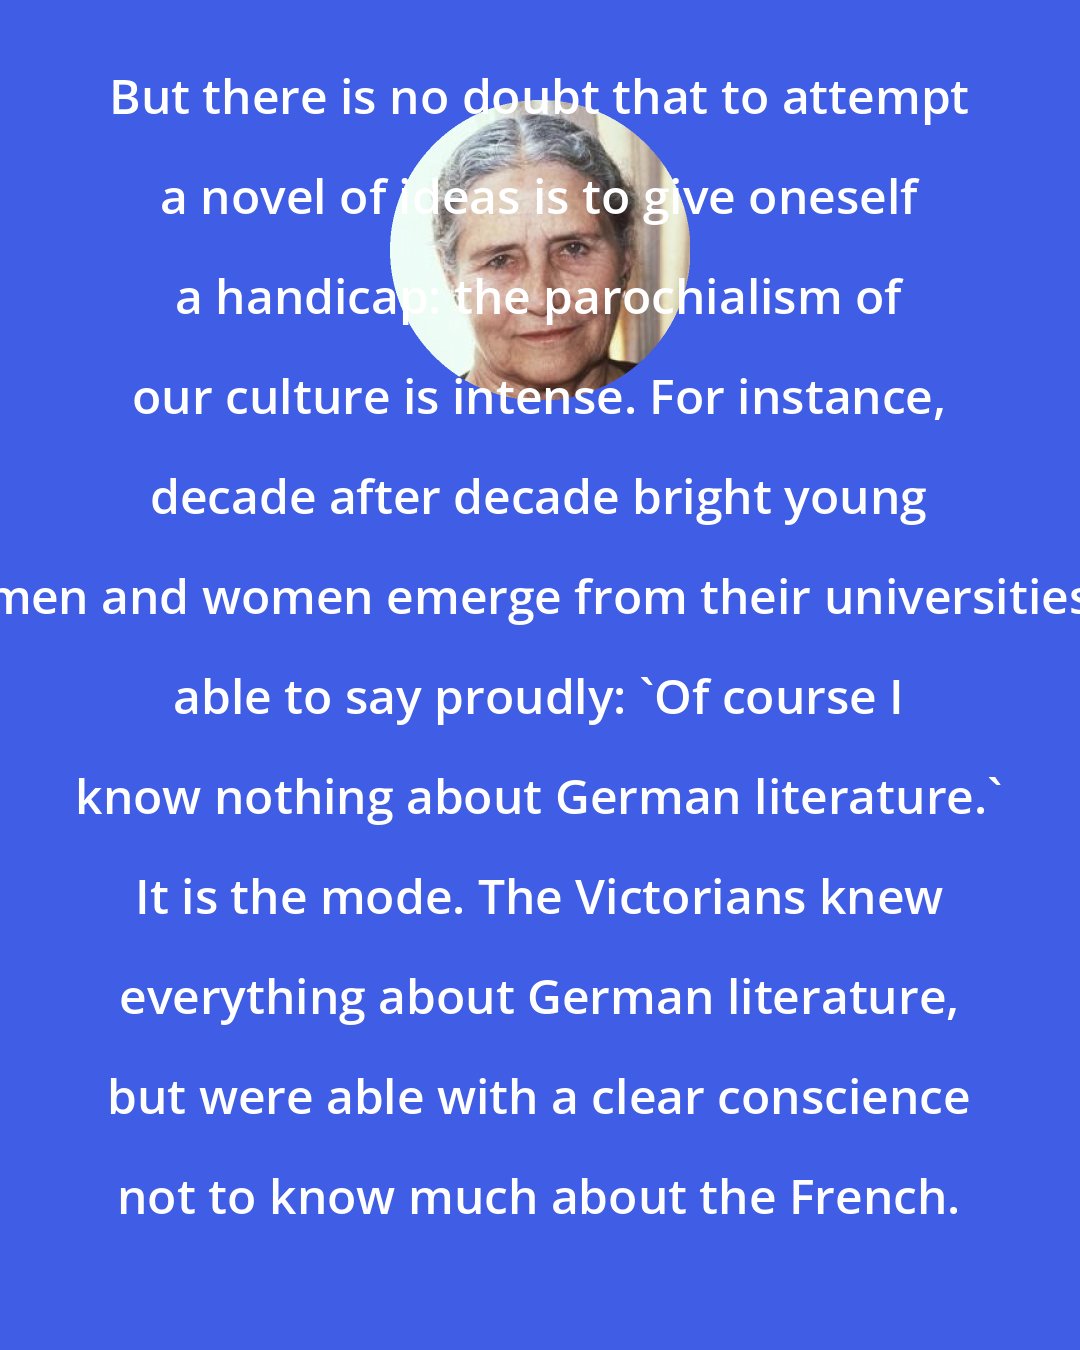 Doris Lessing: But there is no doubt that to attempt a novel of ideas is to give oneself a handicap: the parochialism of our culture is intense. For instance, decade after decade bright young men and women emerge from their universities able to say proudly: 'Of course I know nothing about German literature.' It is the mode. The Victorians knew everything about German literature, but were able with a clear conscience not to know much about the French.